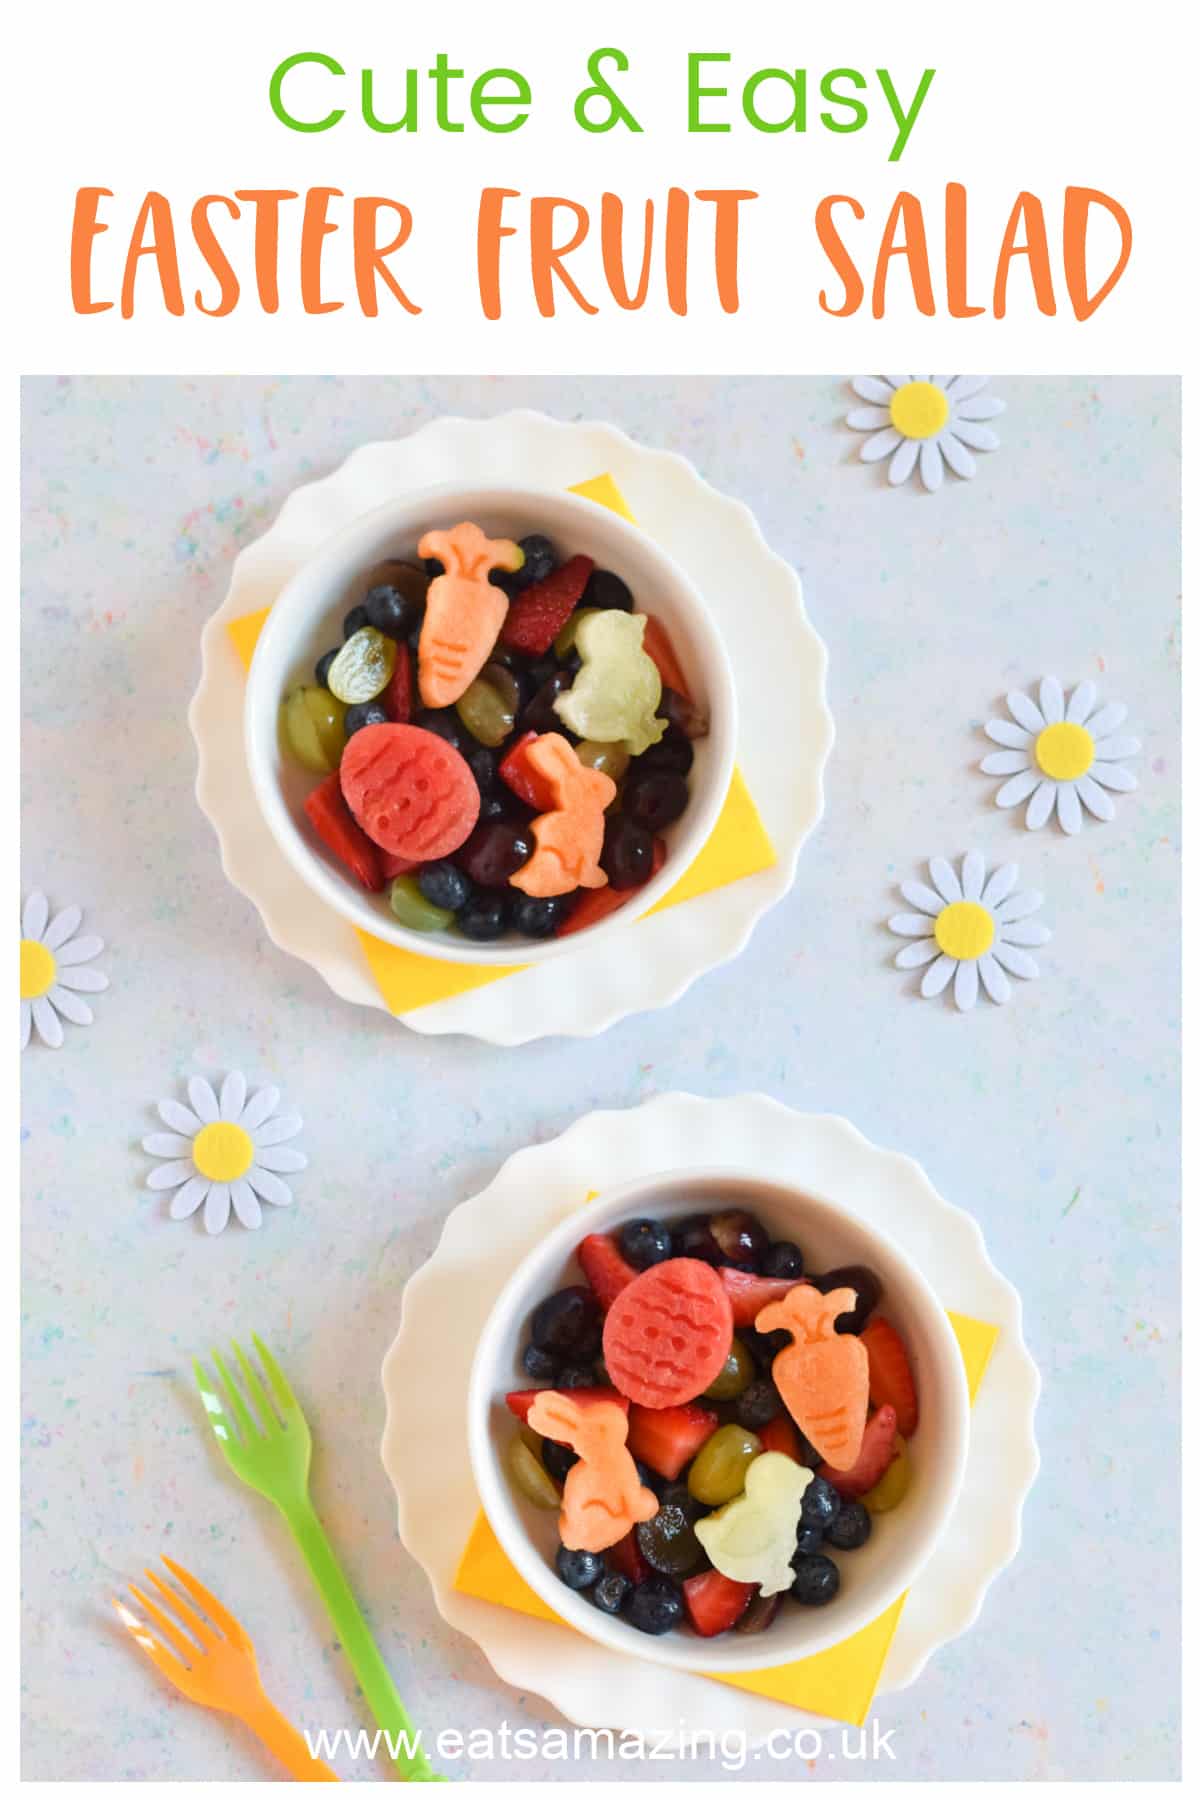 Easy Easter Fruit Salad recipe for kids - fun healthy Easter Dessert the whole family will love